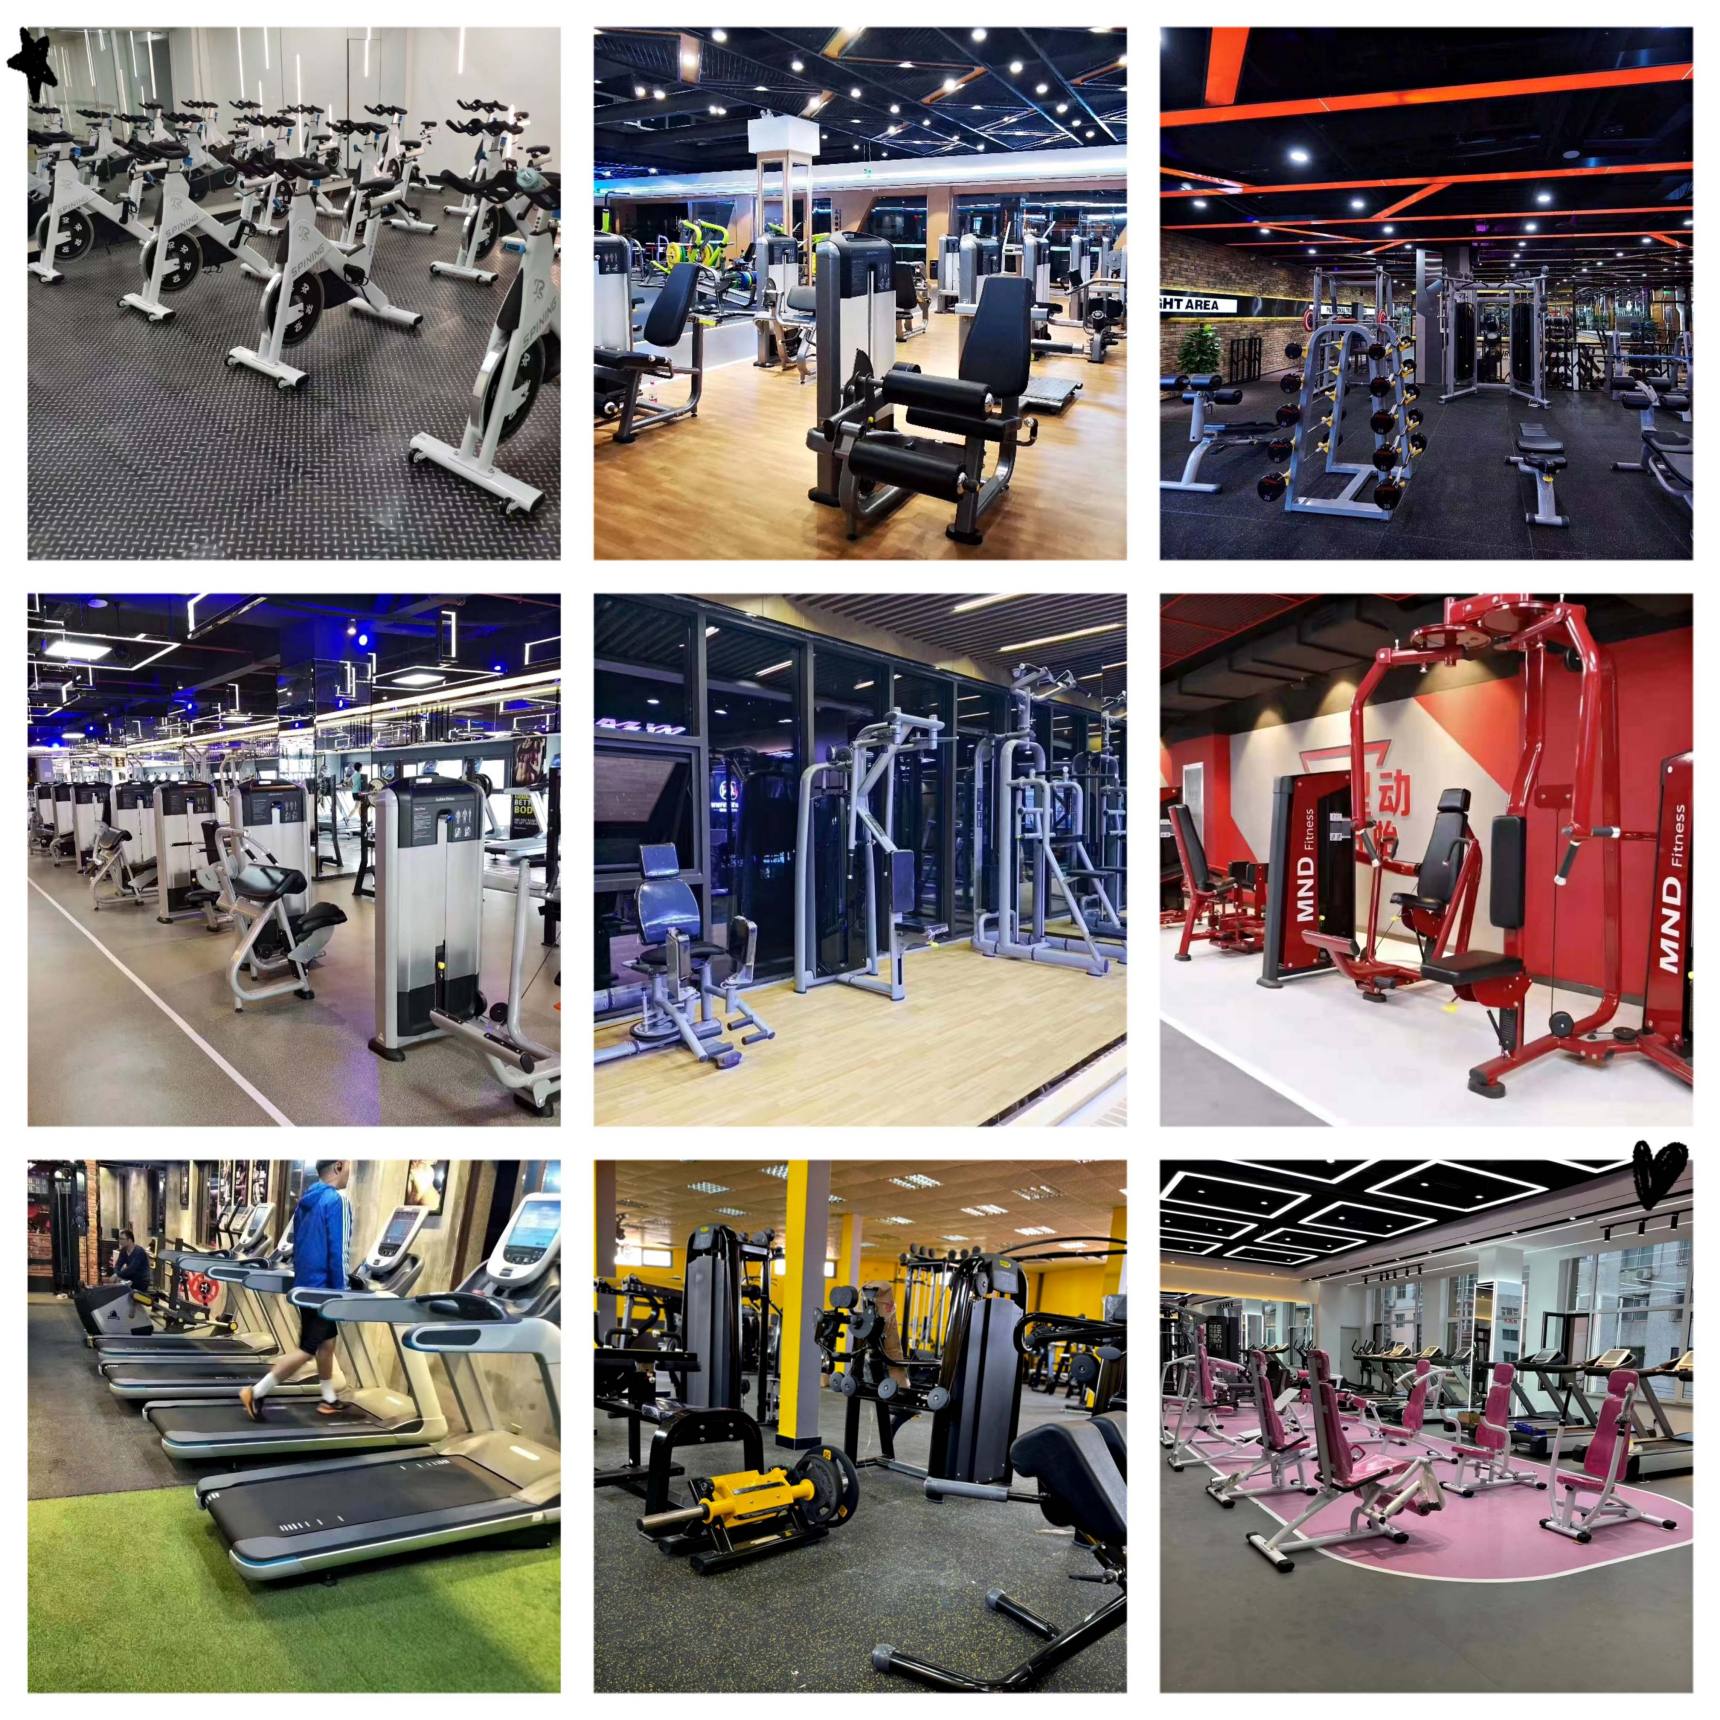 Professional Commercial Multi Gym Machine Multifunctional Pull Up Station Trainer Bench Press body building machine